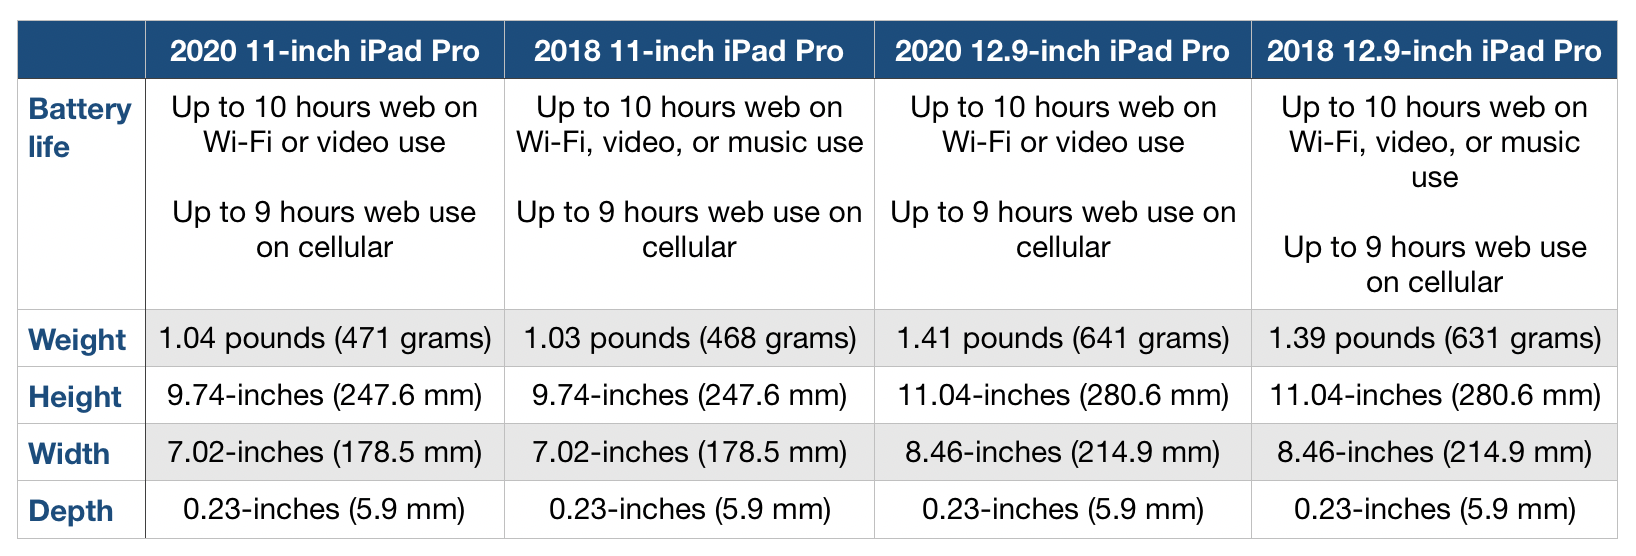 2020 new iPad Pro compare 2018 iPad Pro size, weight, battery specs